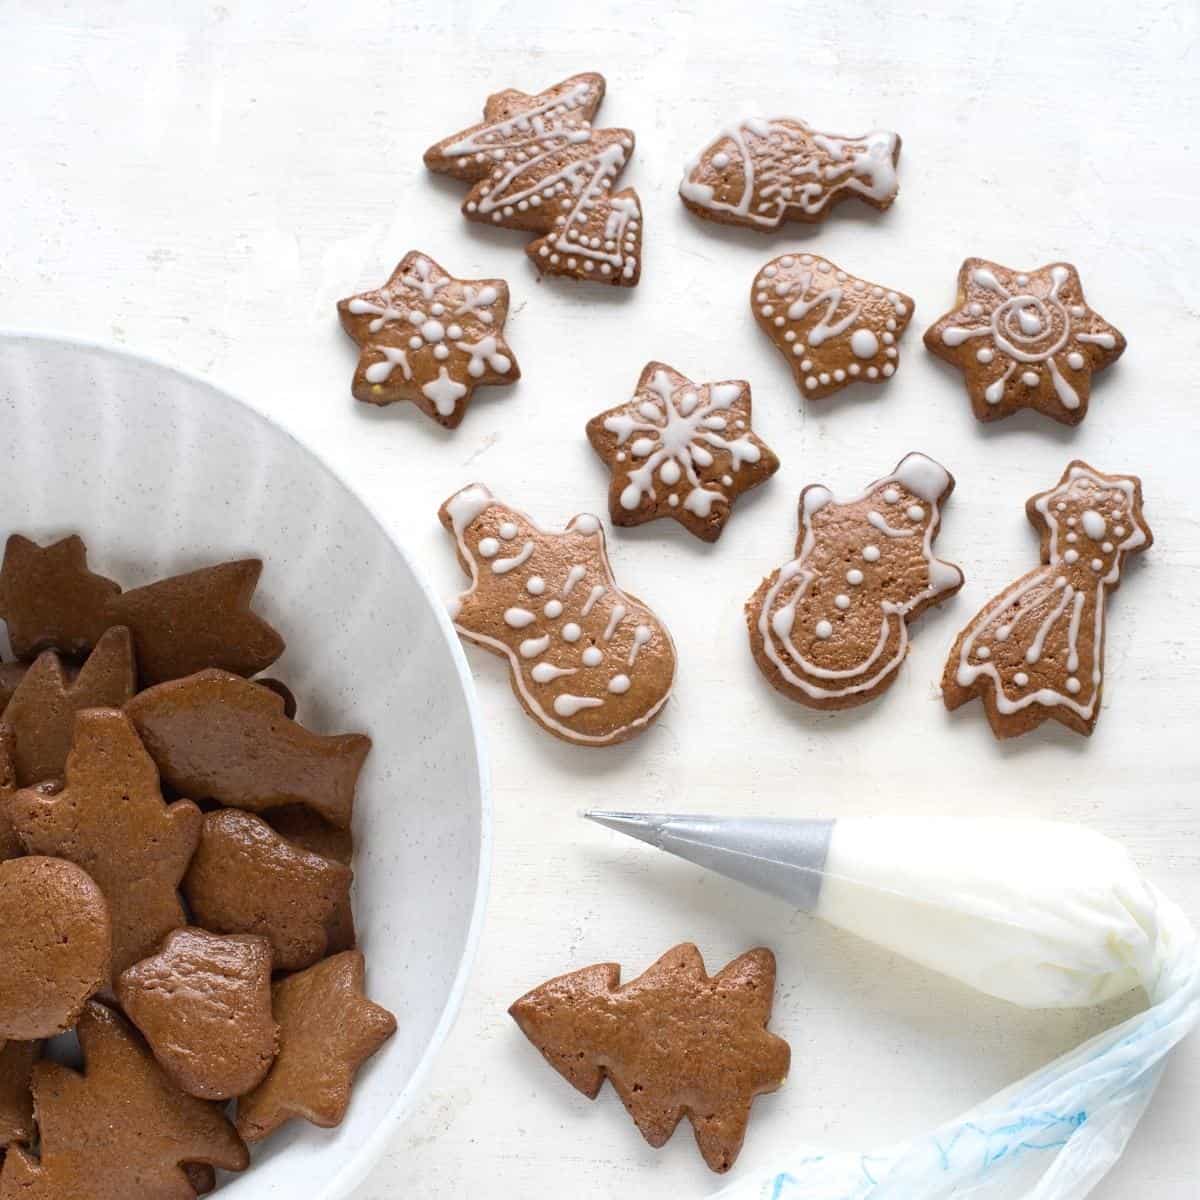 Decorating gingerbread cookies with sugar icing.